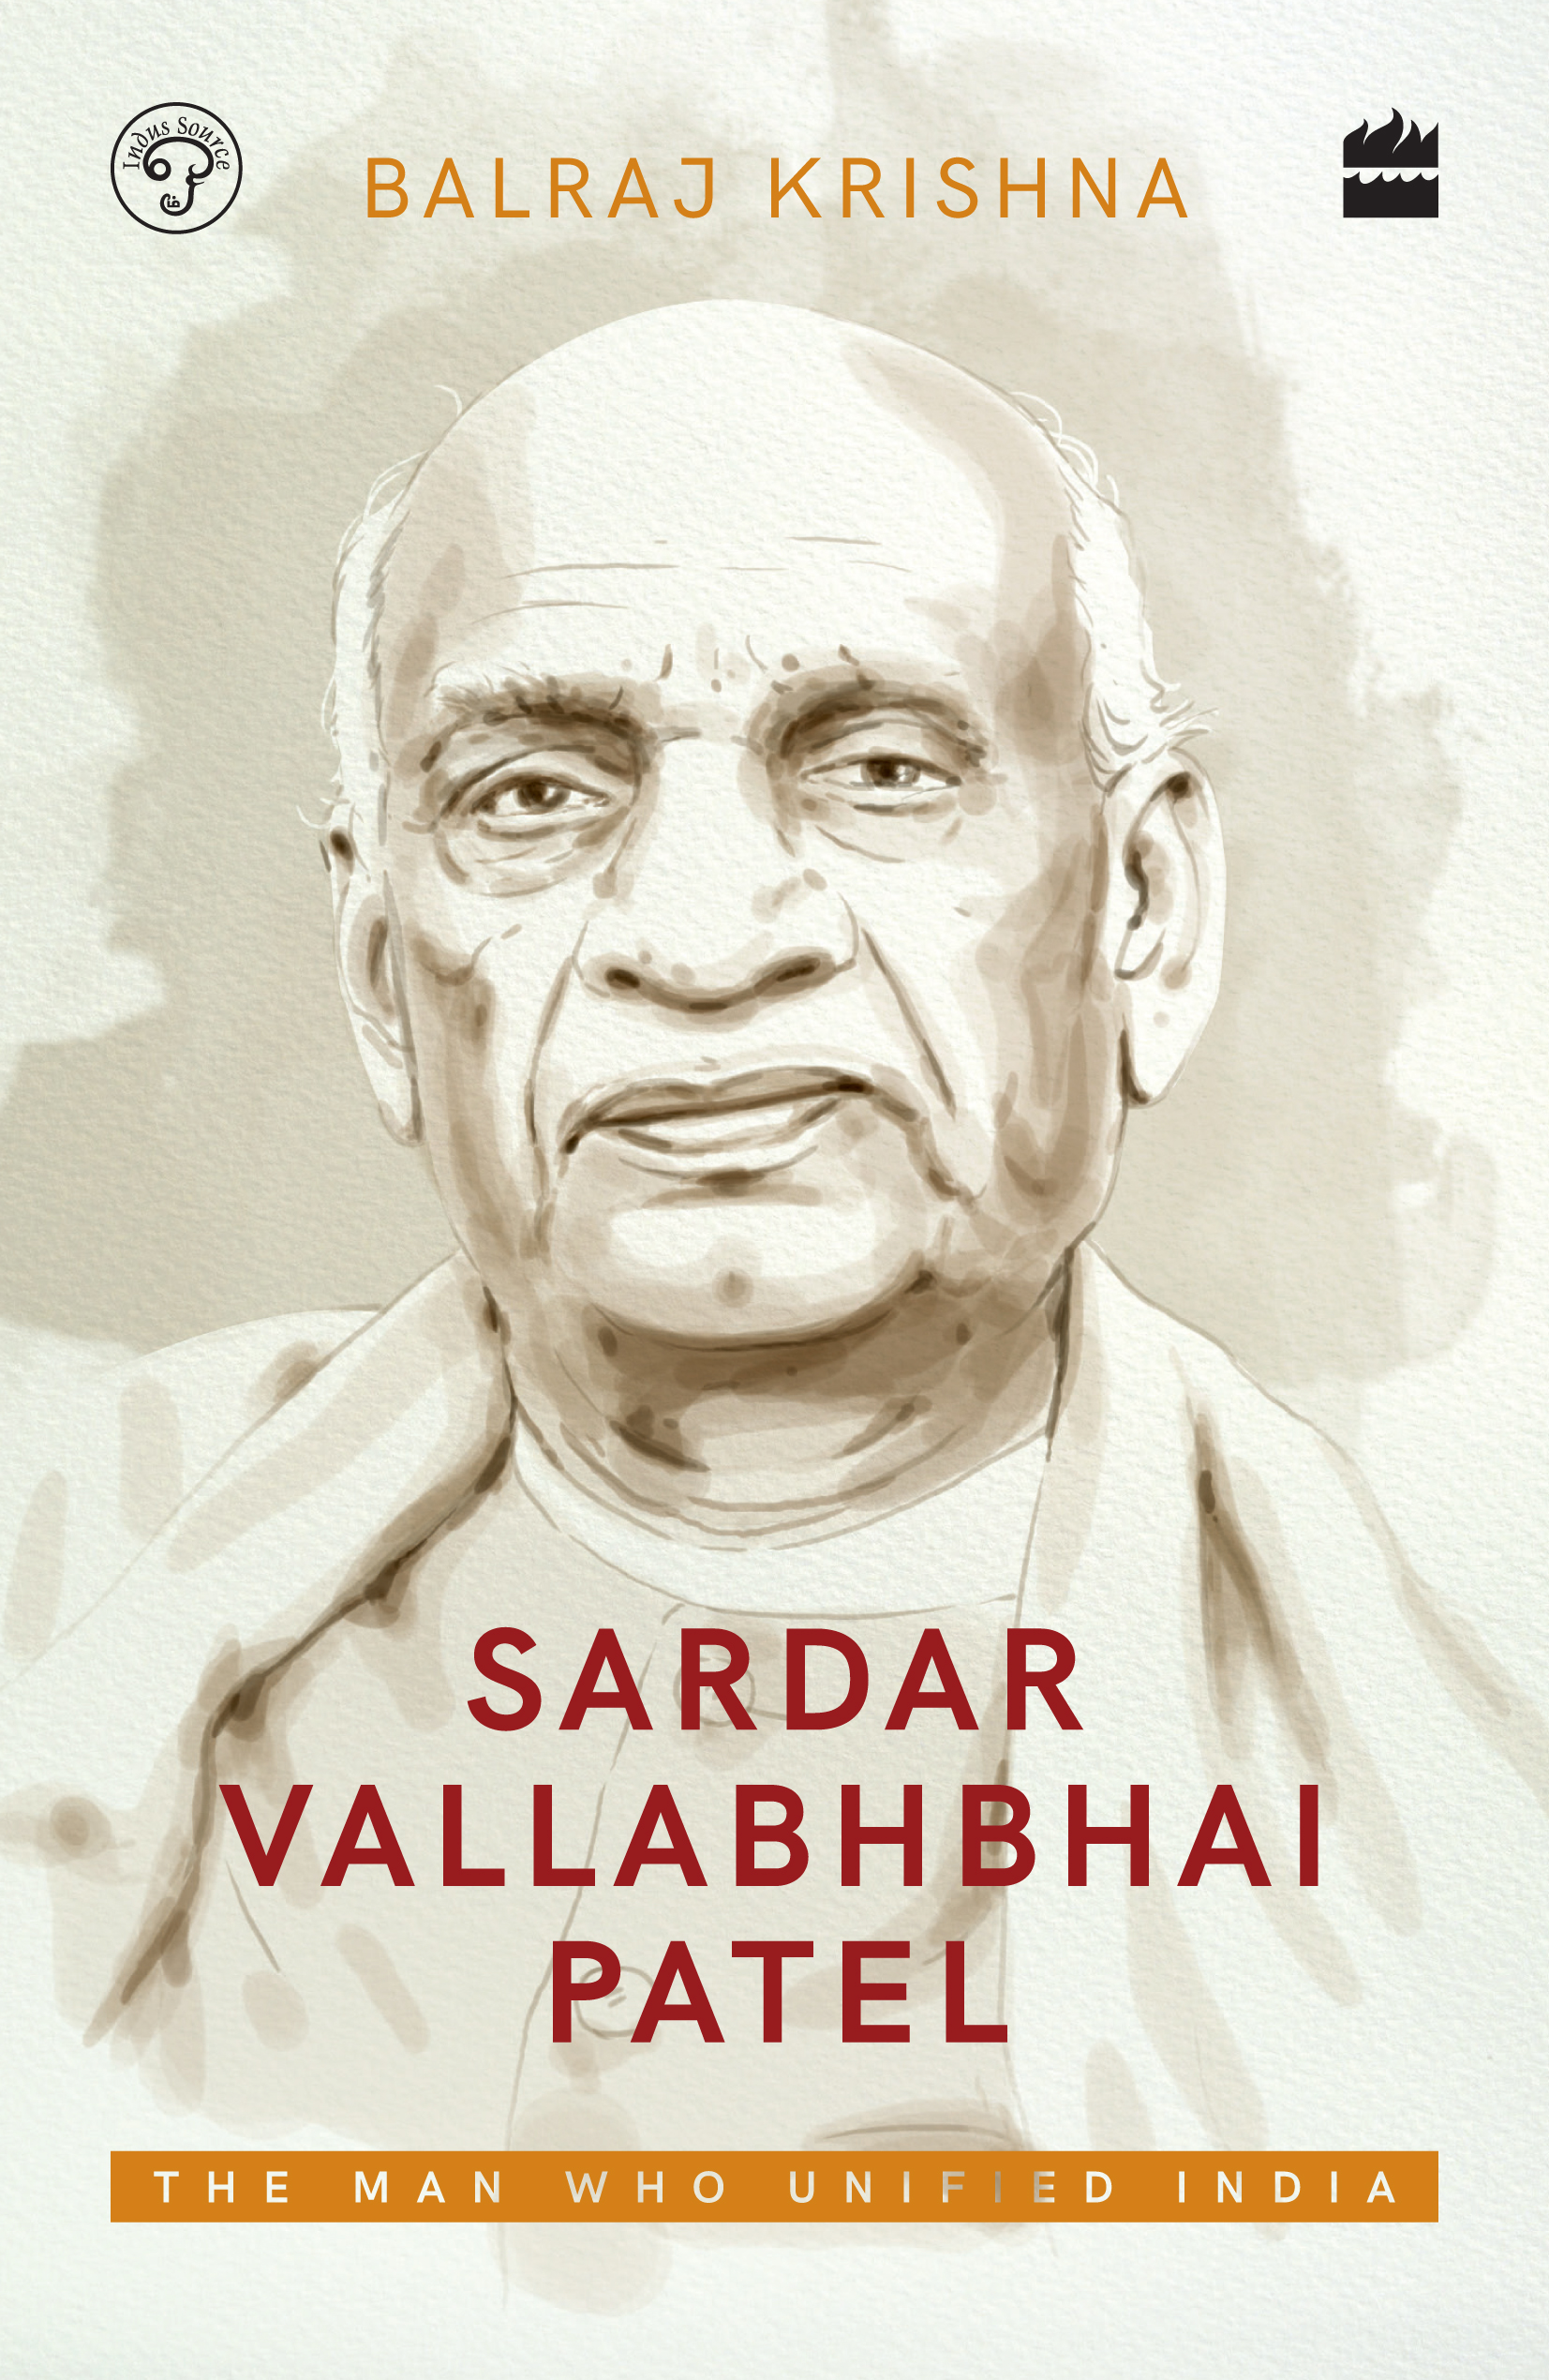 Sardar patel:The man who Unified india